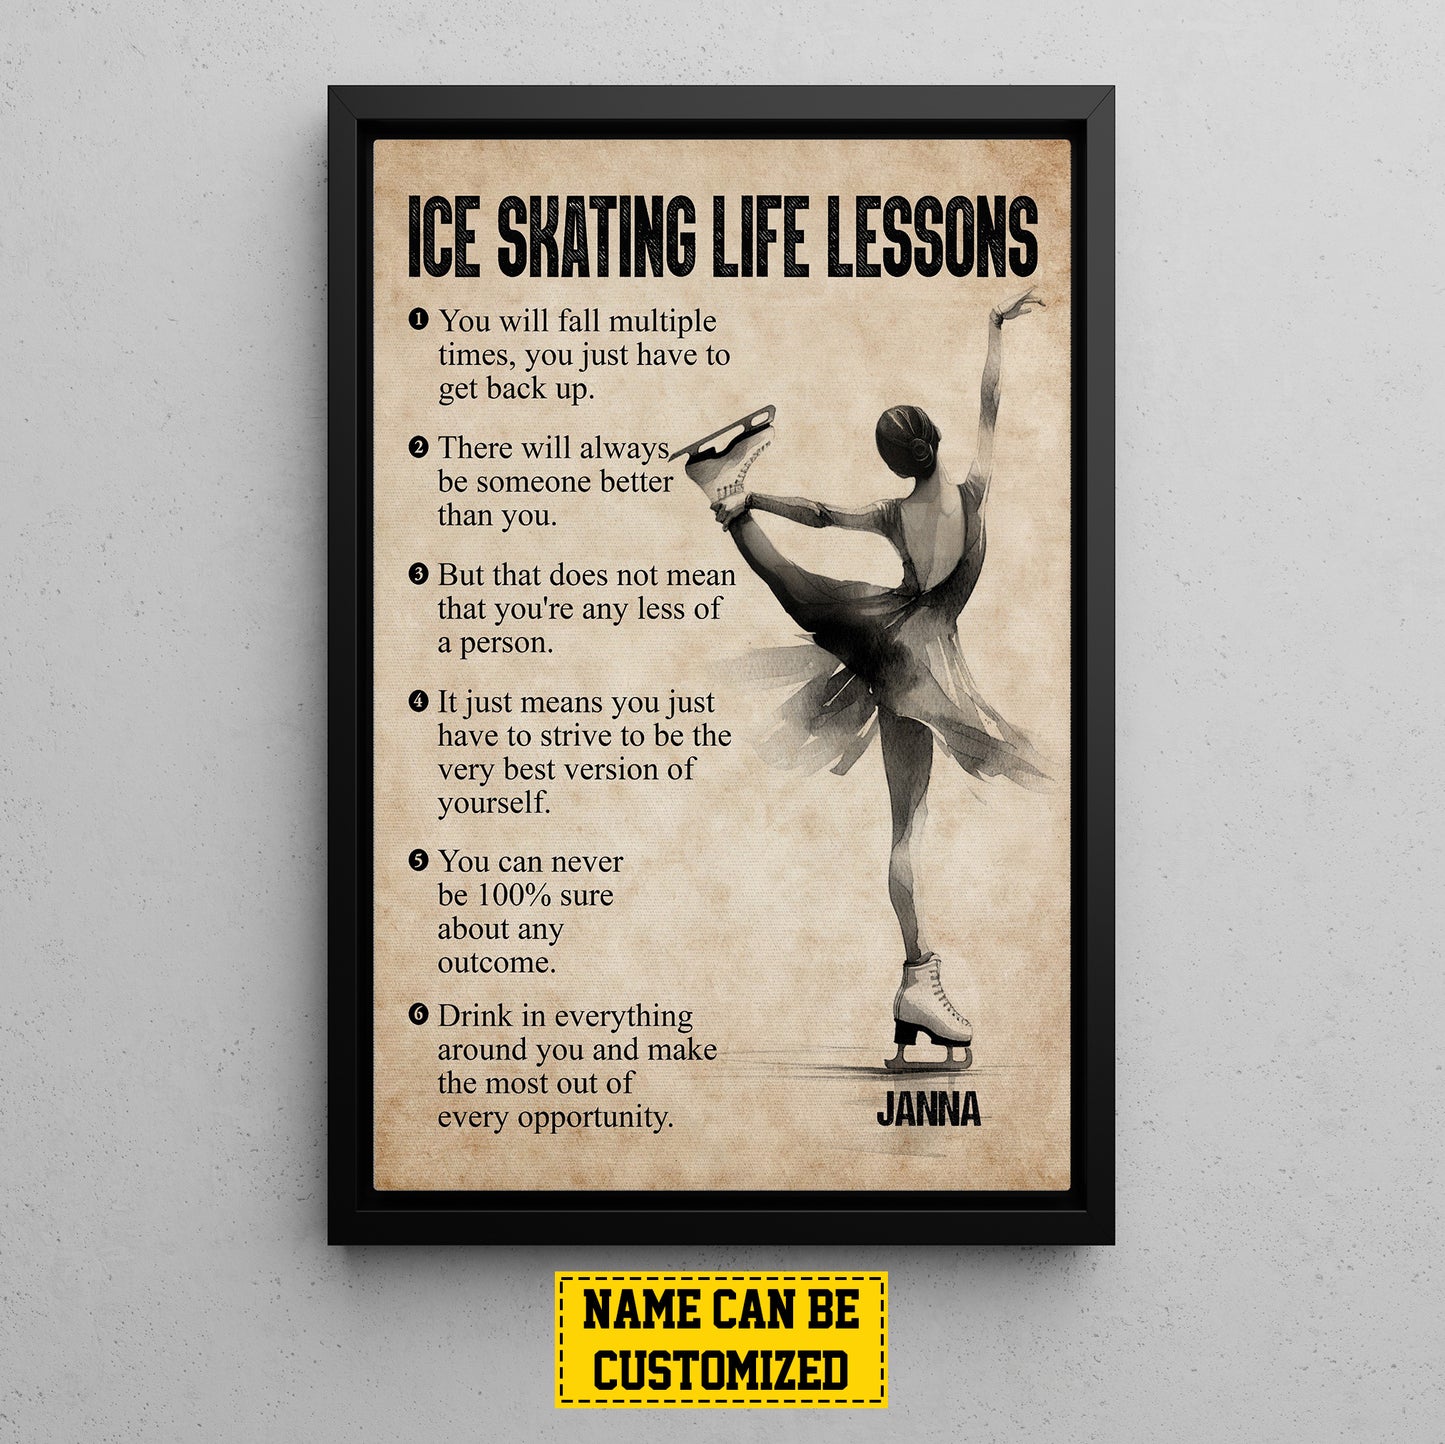 Ice Skating Life Lessons, Personalized Motivational Ice Skating Girl Canvas Painting, Inspirational Quotes Wall Art Decor, Poster Gift For Ice Skating Woman Lovers